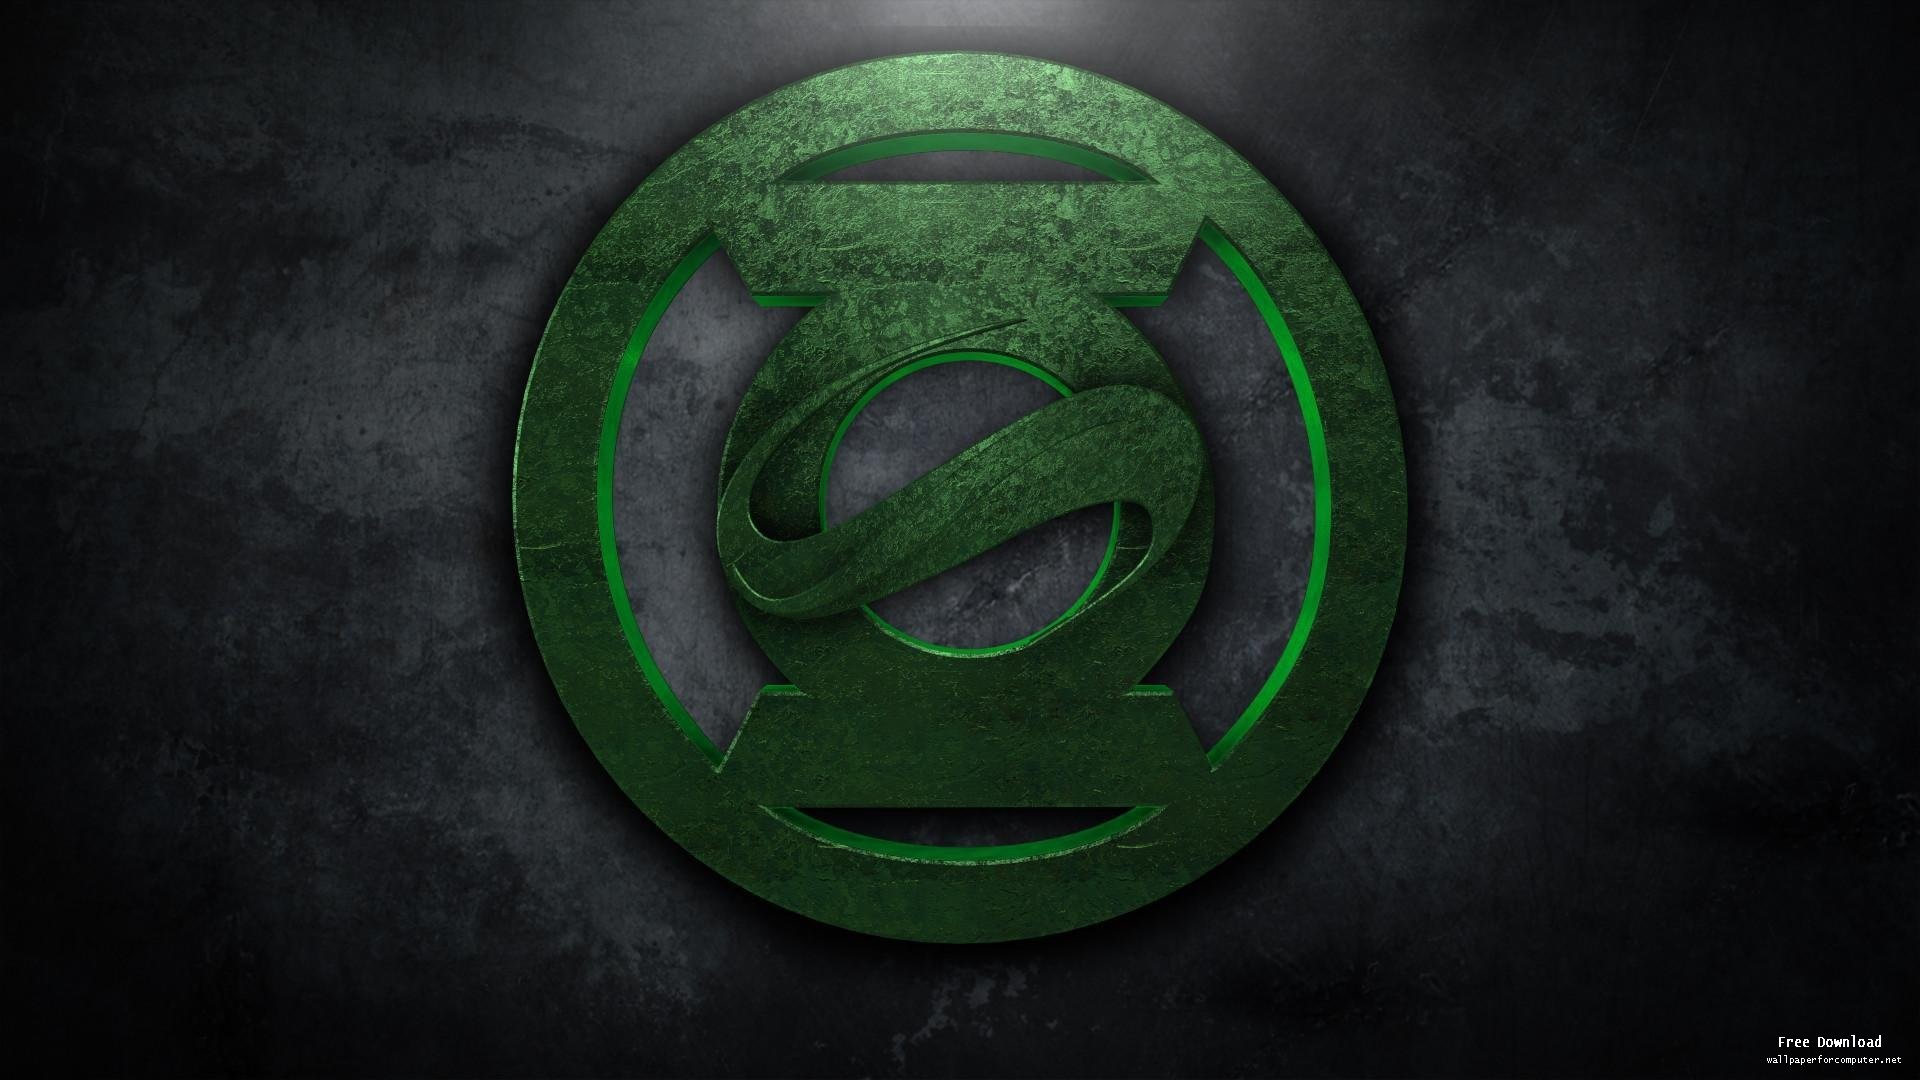 1920x1080 Green Lantern logo Wallpapers for Computer 218 - HD Wallpapers Site